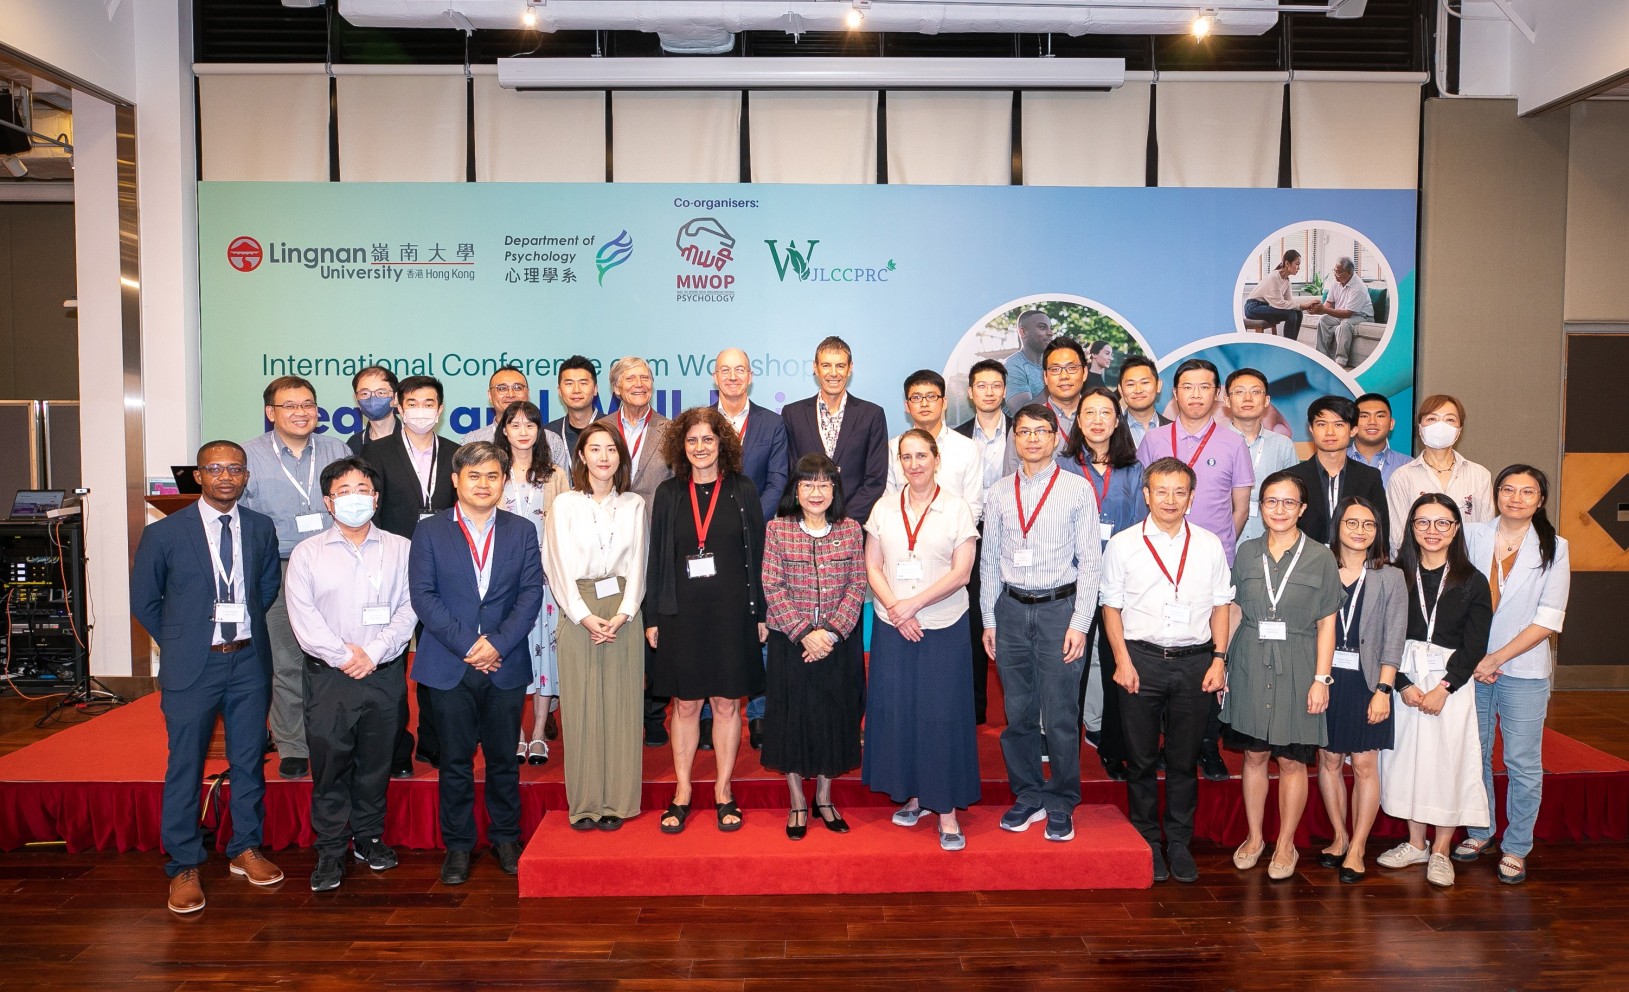 Department of Psychology marks its 10th anniversary with a successful international conference-cum-workshop on health and well-being